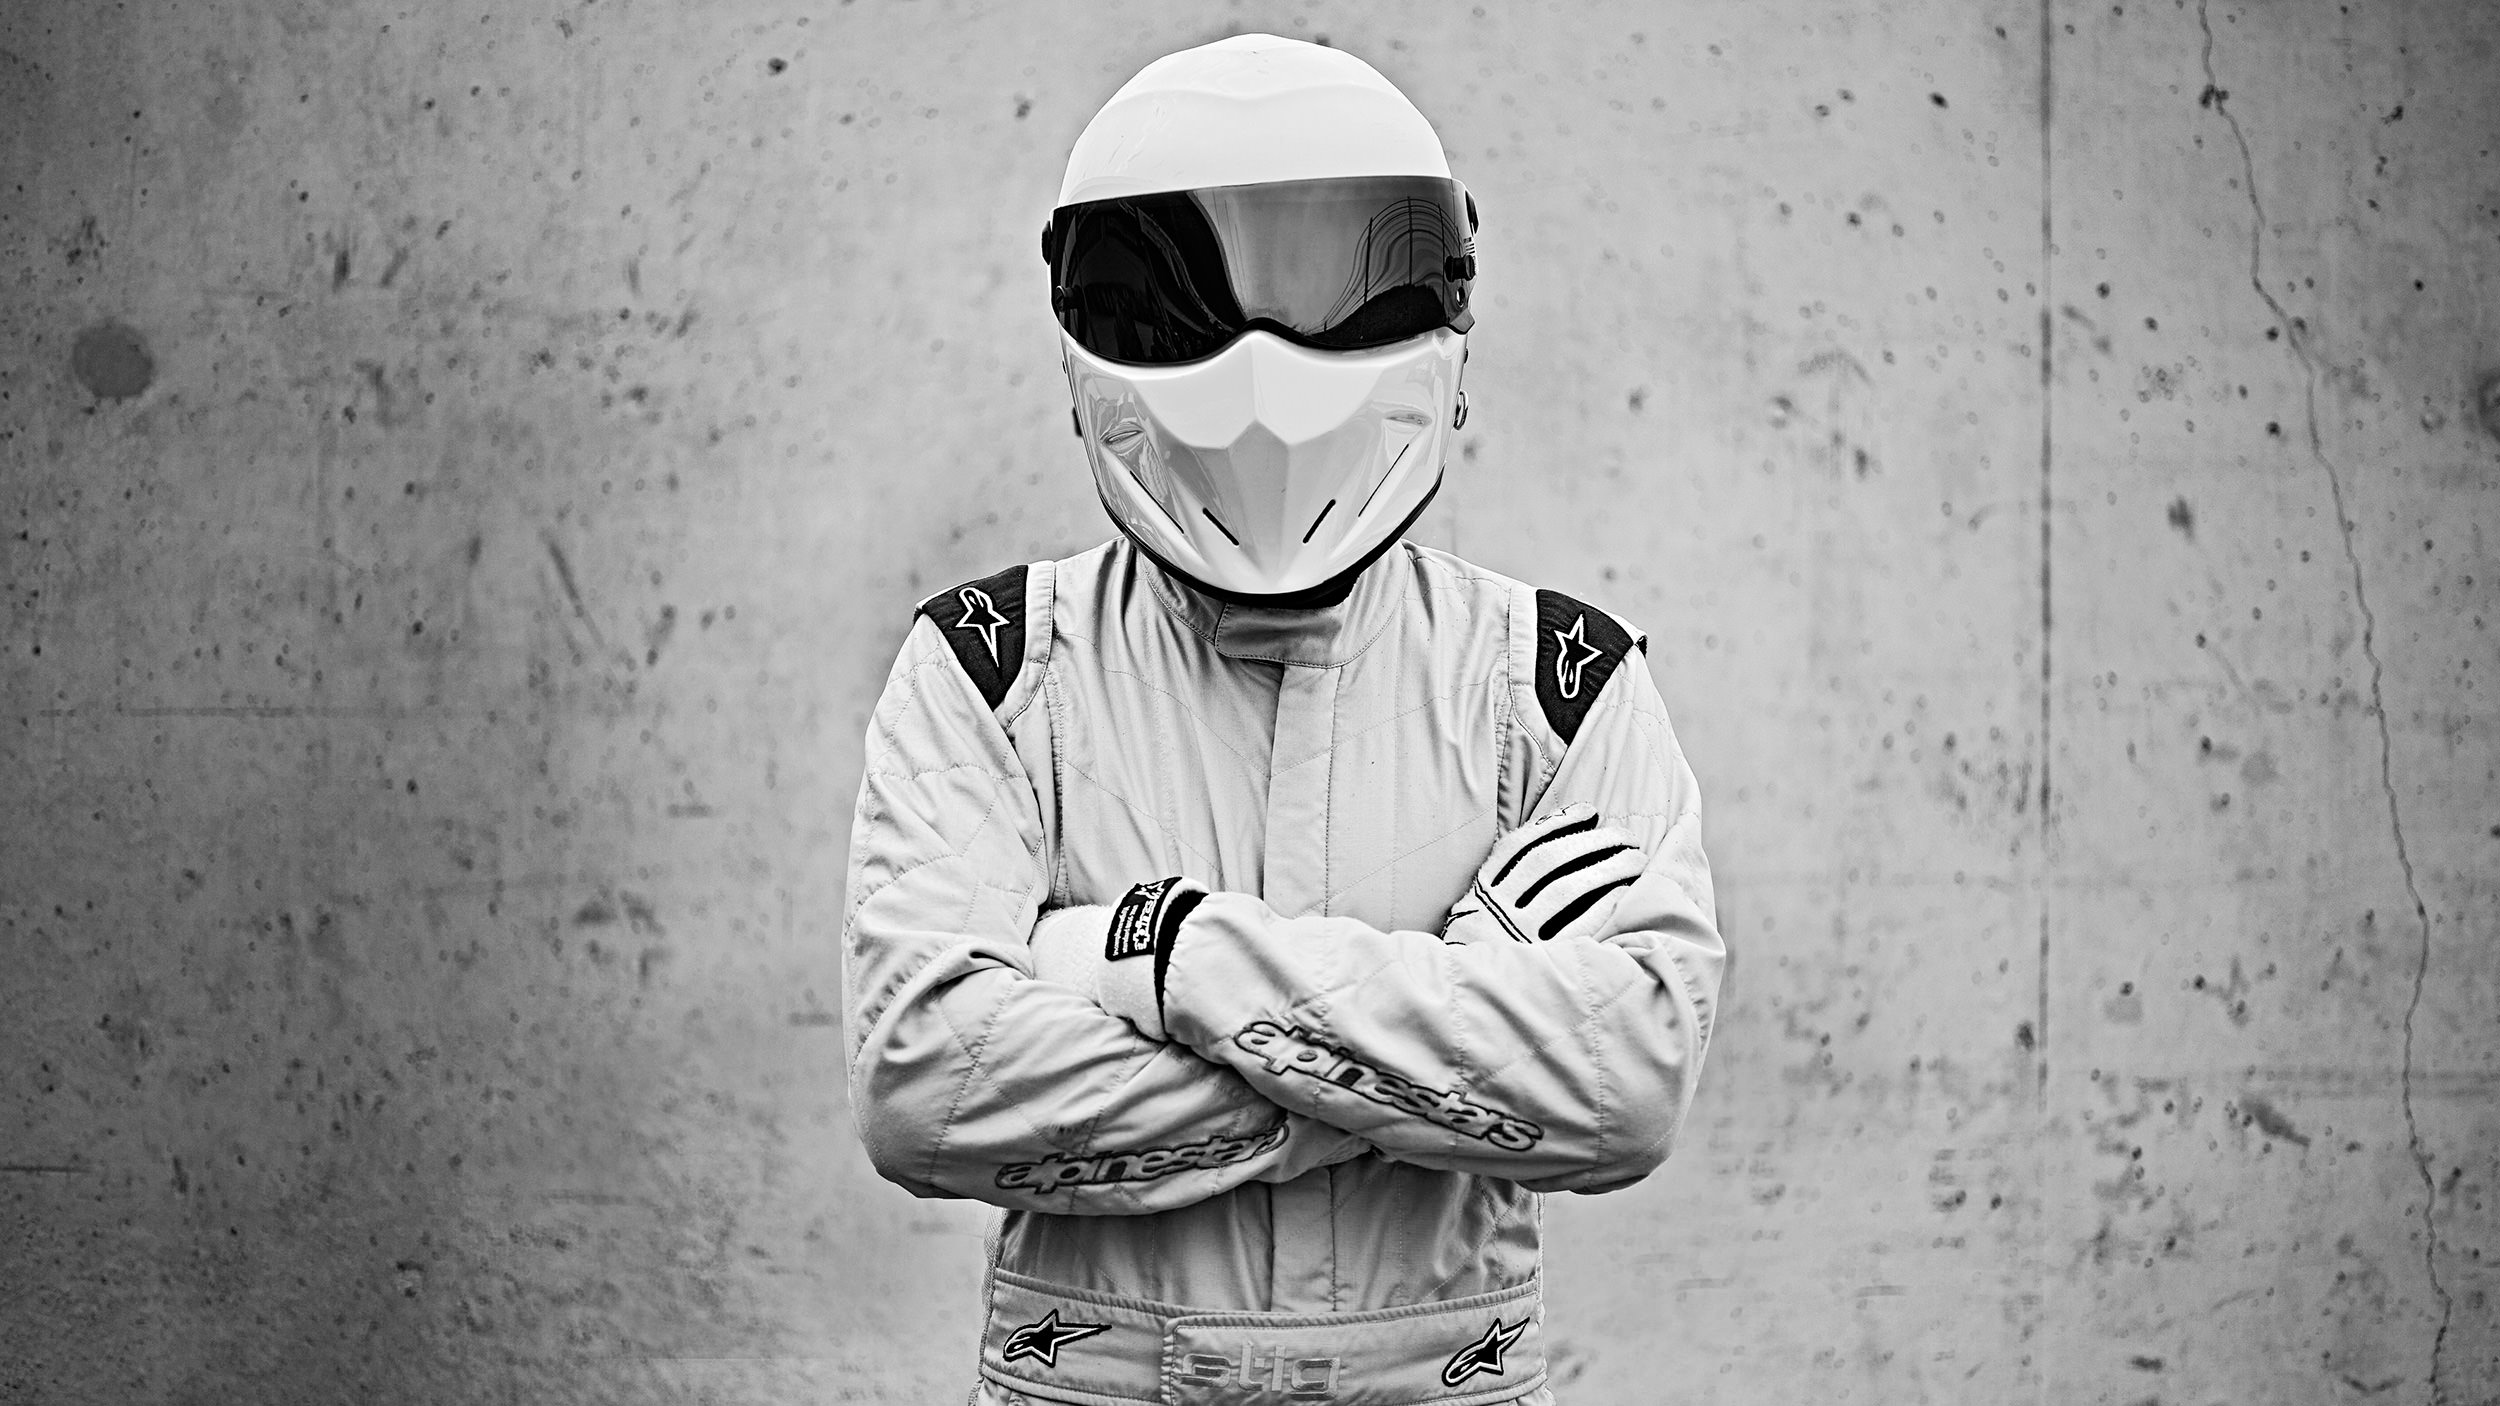 behuizing Realistisch zonsondergang Former Top Gear 'The Stig' reveals his favourite talent in Formula 1